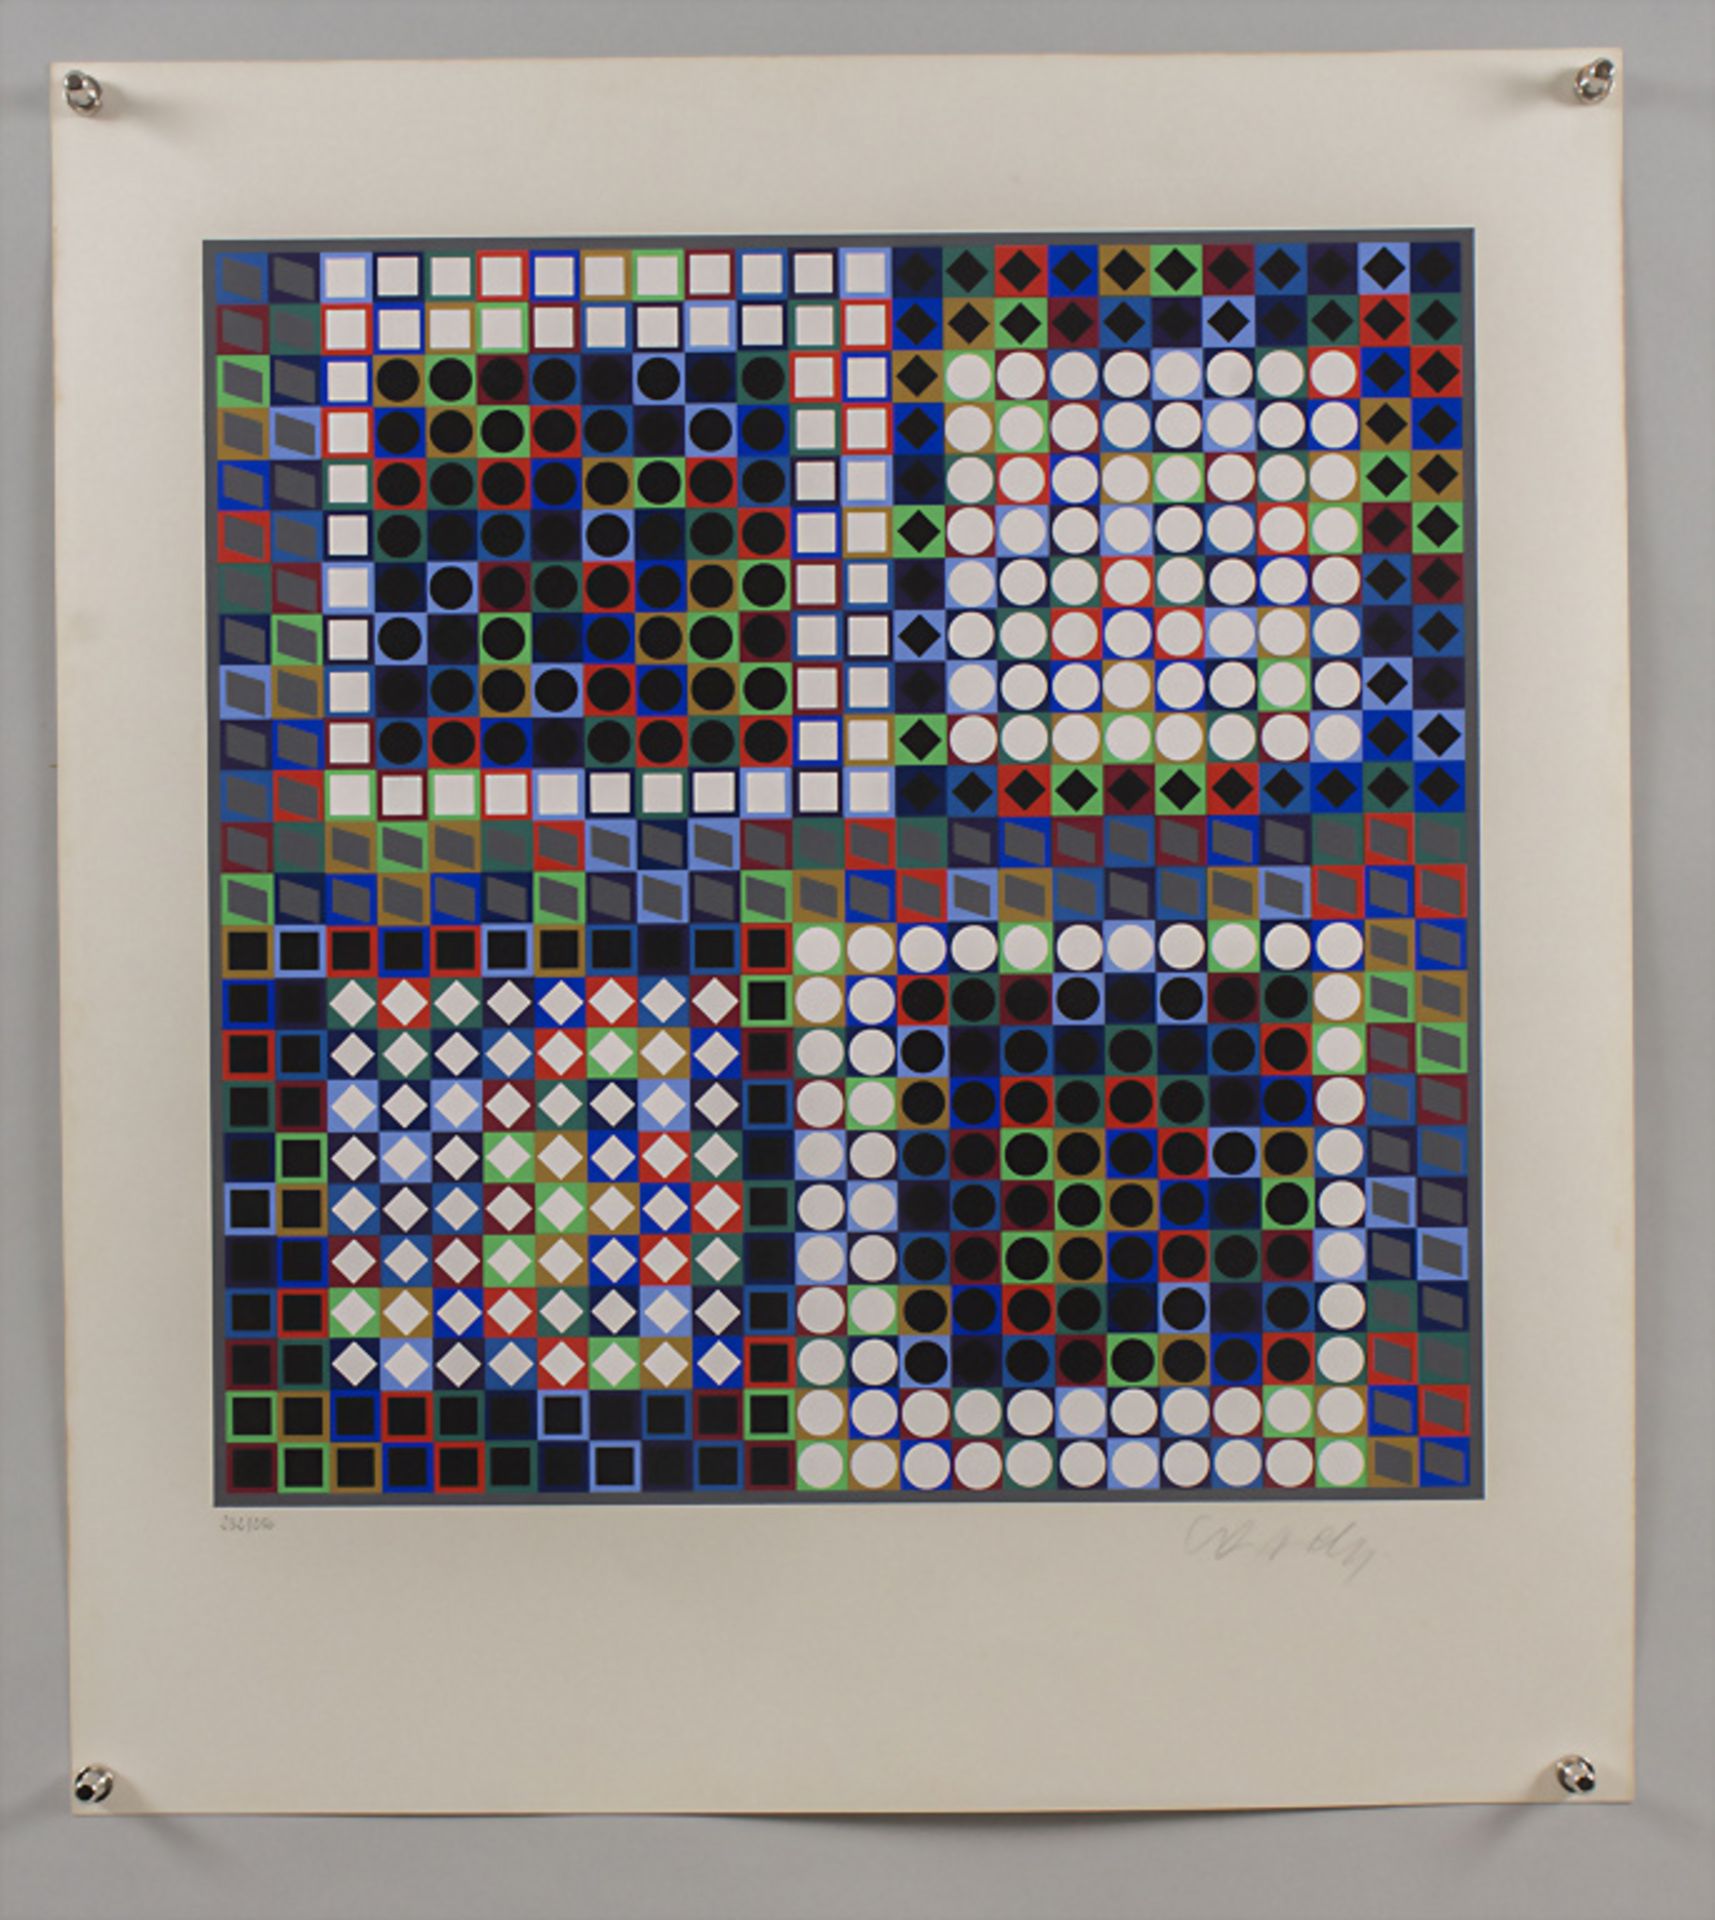 Victor VASARELY (1906-1997), 'Kinetische Komposition' / 'Kinetic composition' - Image 2 of 5